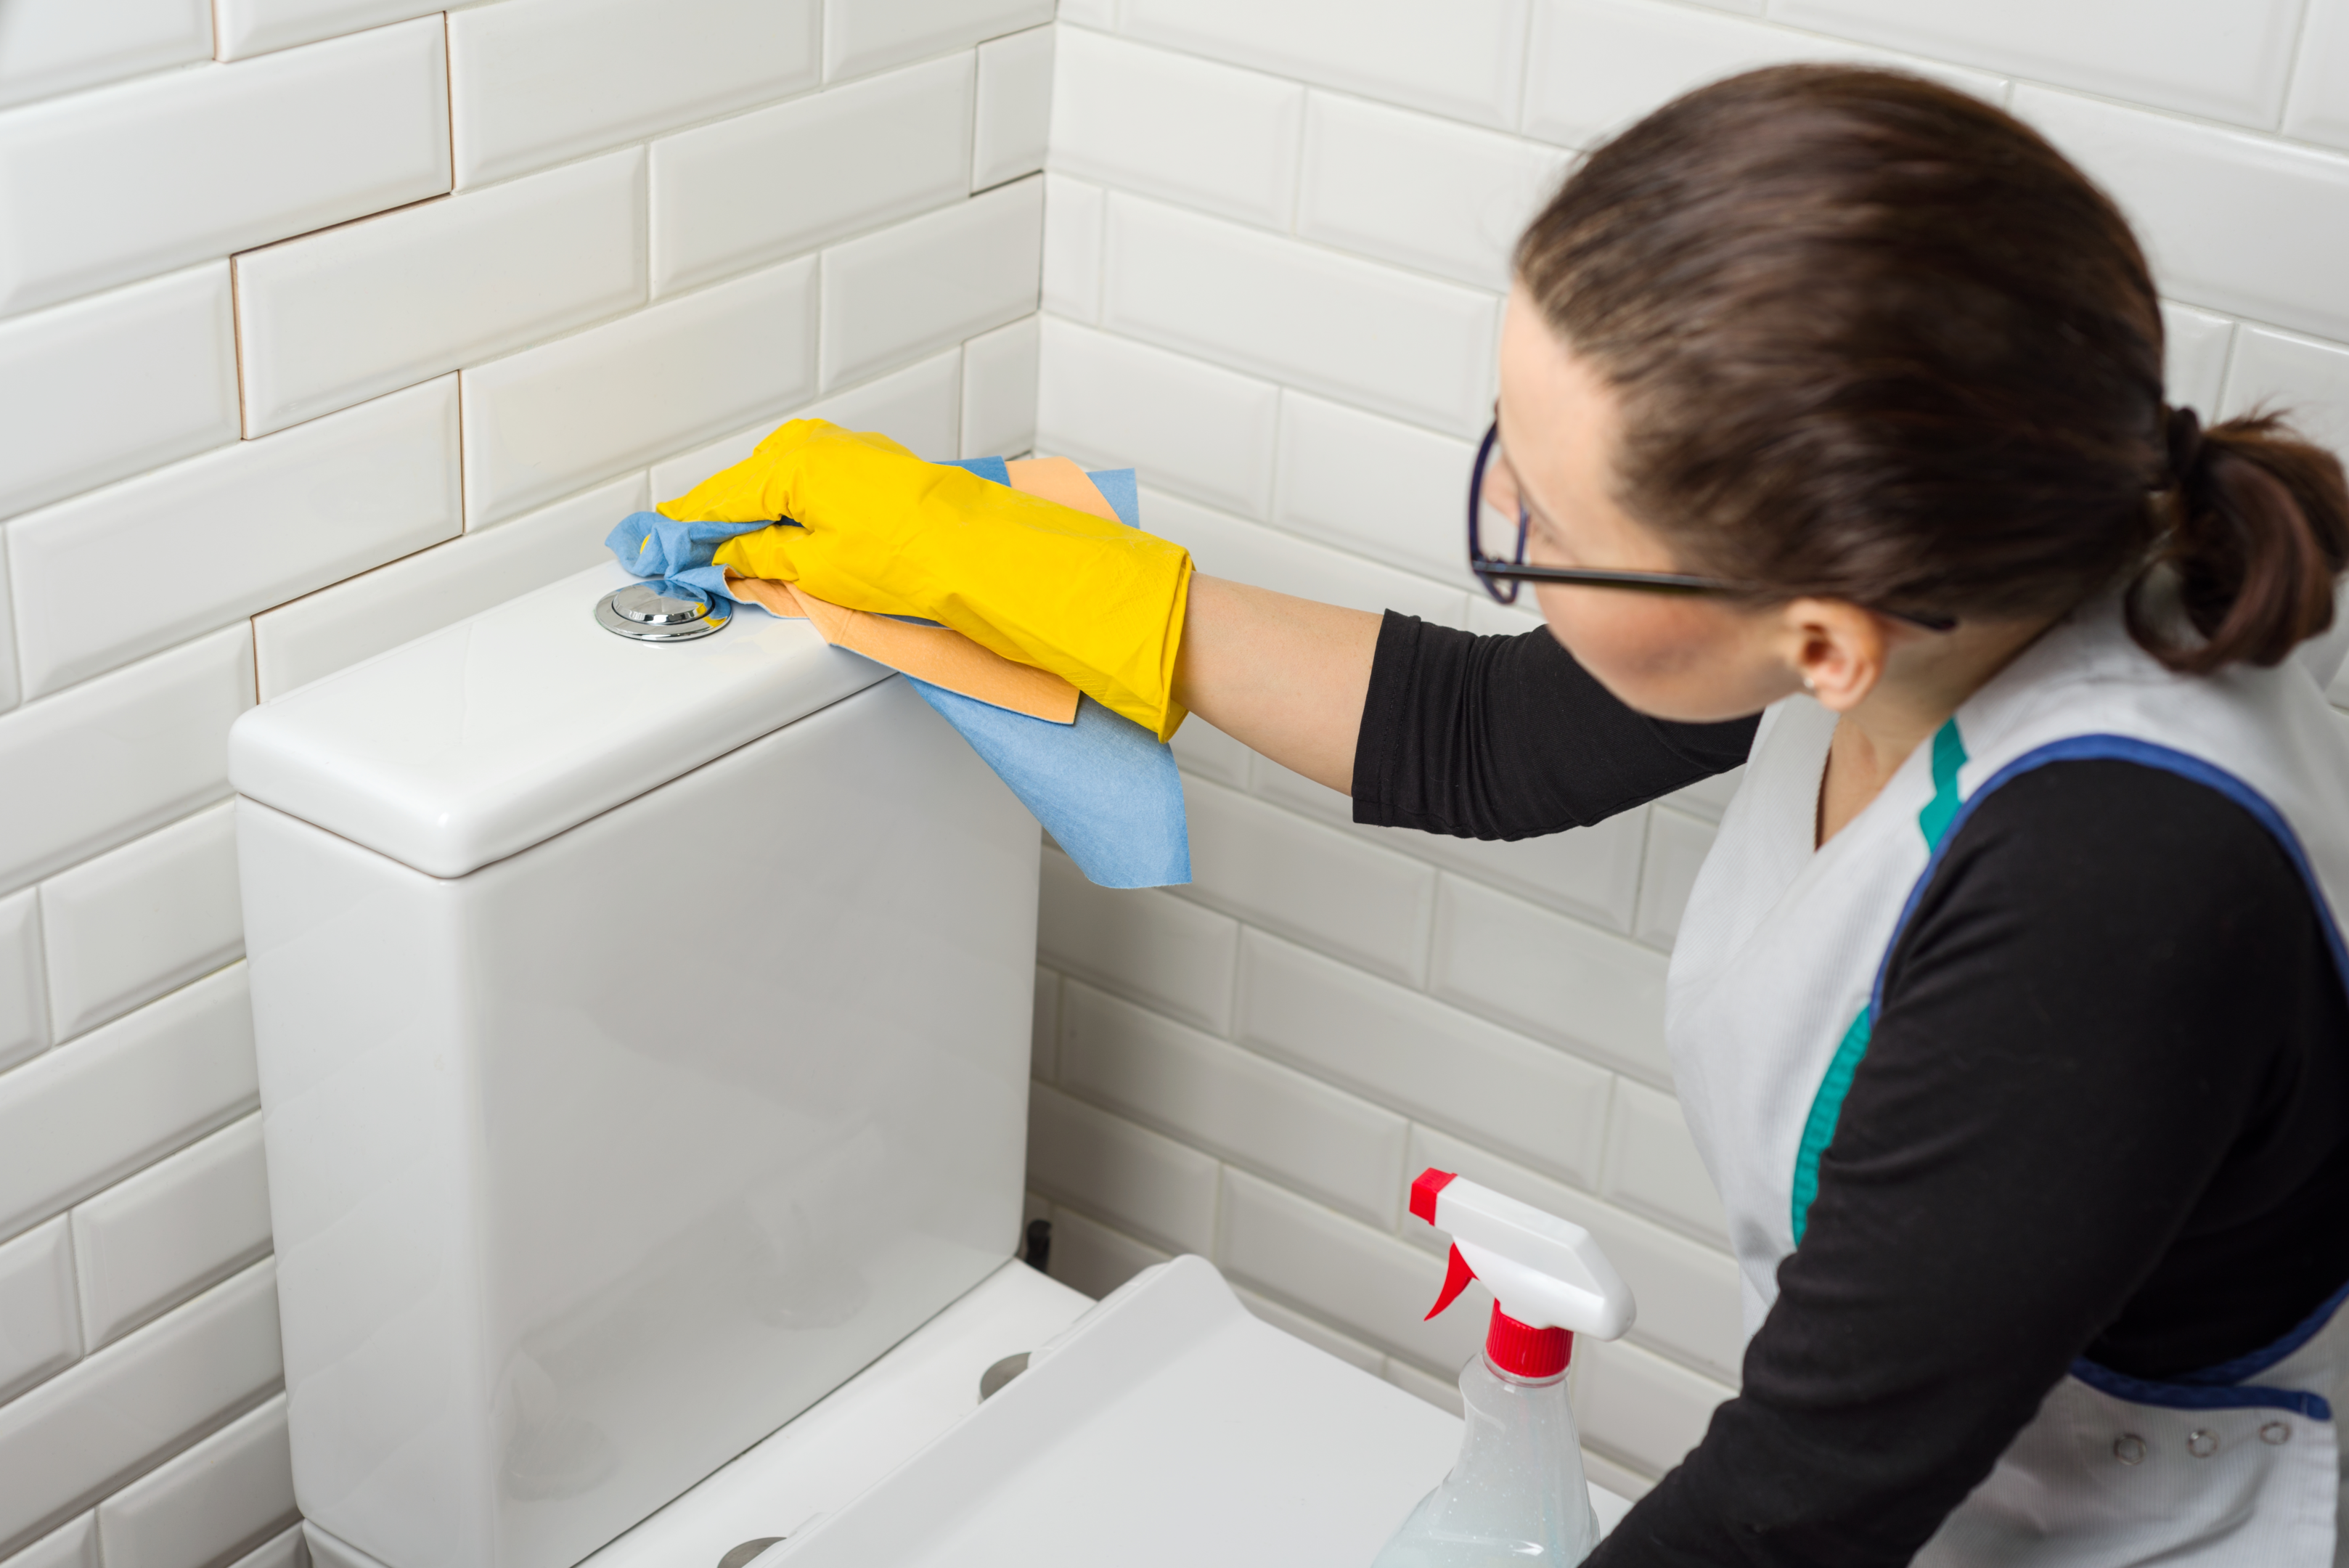 Toilet cleaning hacks you can do without a toilet brush